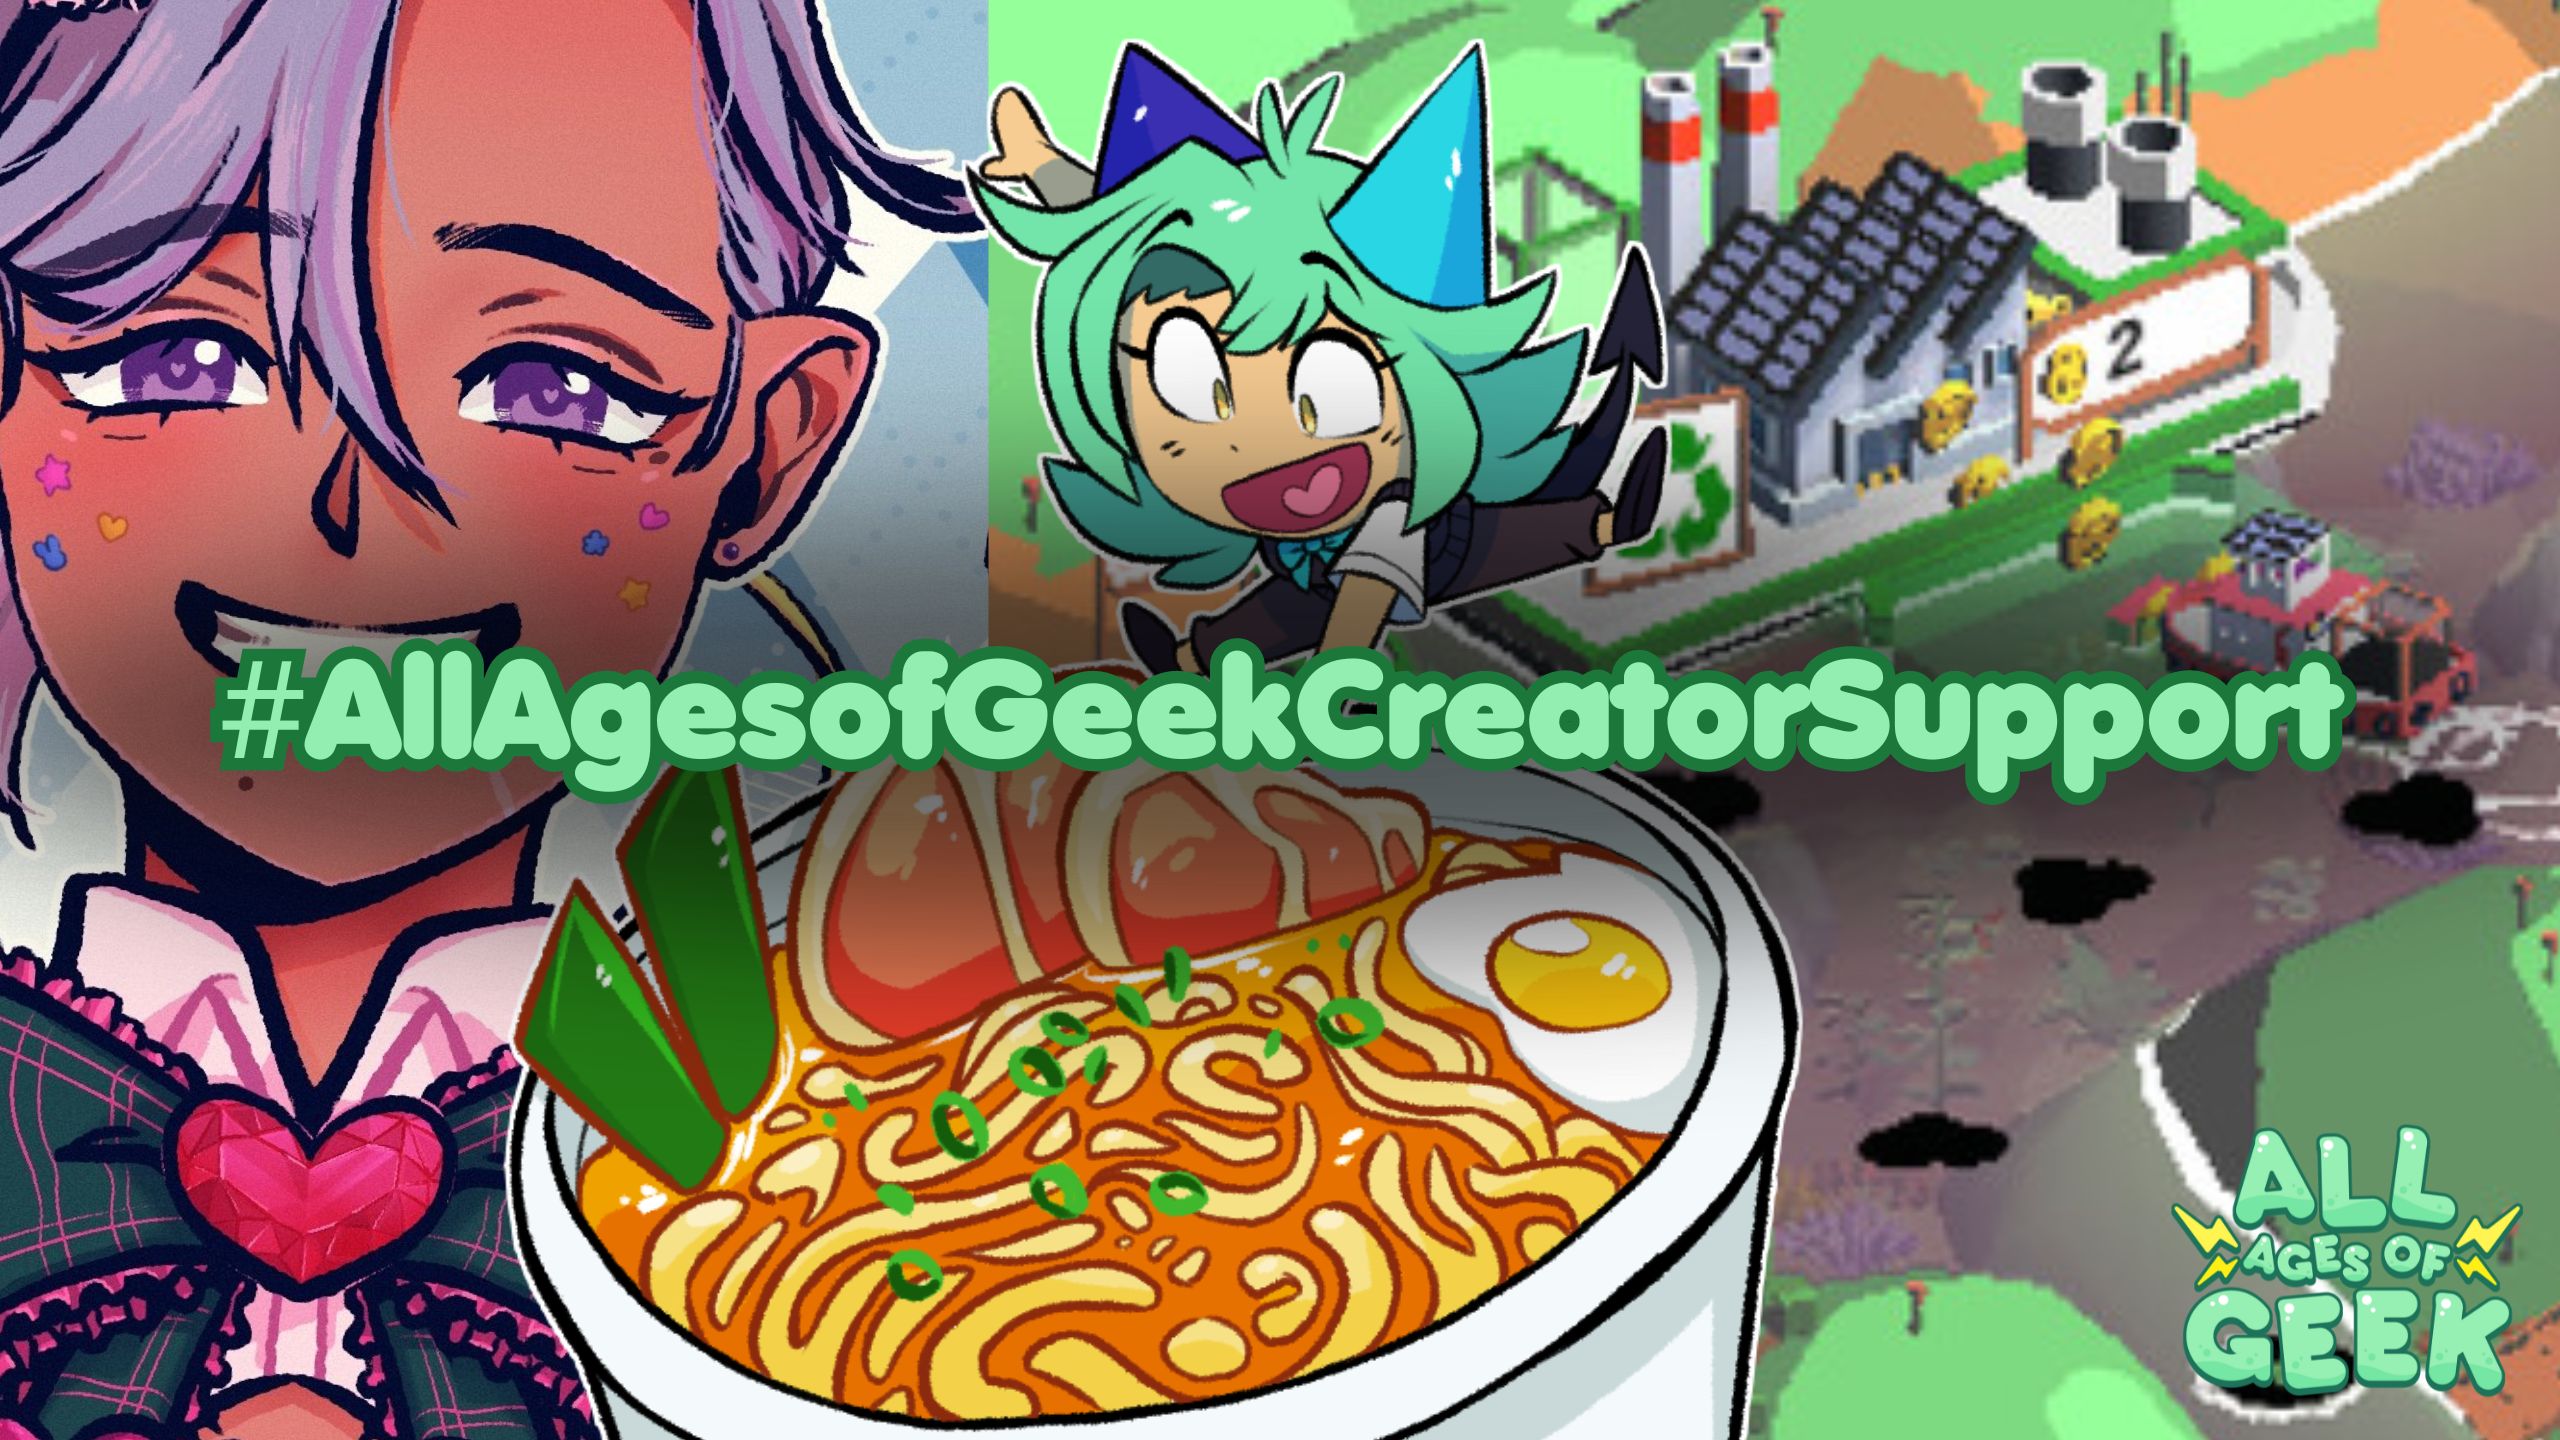 An image collage promoting #AllAgesofGeekCreatorSupport, featuring a smiling animated character with silver hair and star decorations on their cheeks, a vibrant cartoon figure with blue hair and a playful expression, and a bowl of ramen with richly colored toppings. In the background, there is a pixelated image of an industrial plant from a video game. The hashtag #AllAgesofGeekCreatorSupport is prominently displayed across the image in bold, white font, suggesting a campaign to support independent creators. The All Ages of Geek logo is visible in the bottom right corner, adding a brand identity to the collage.